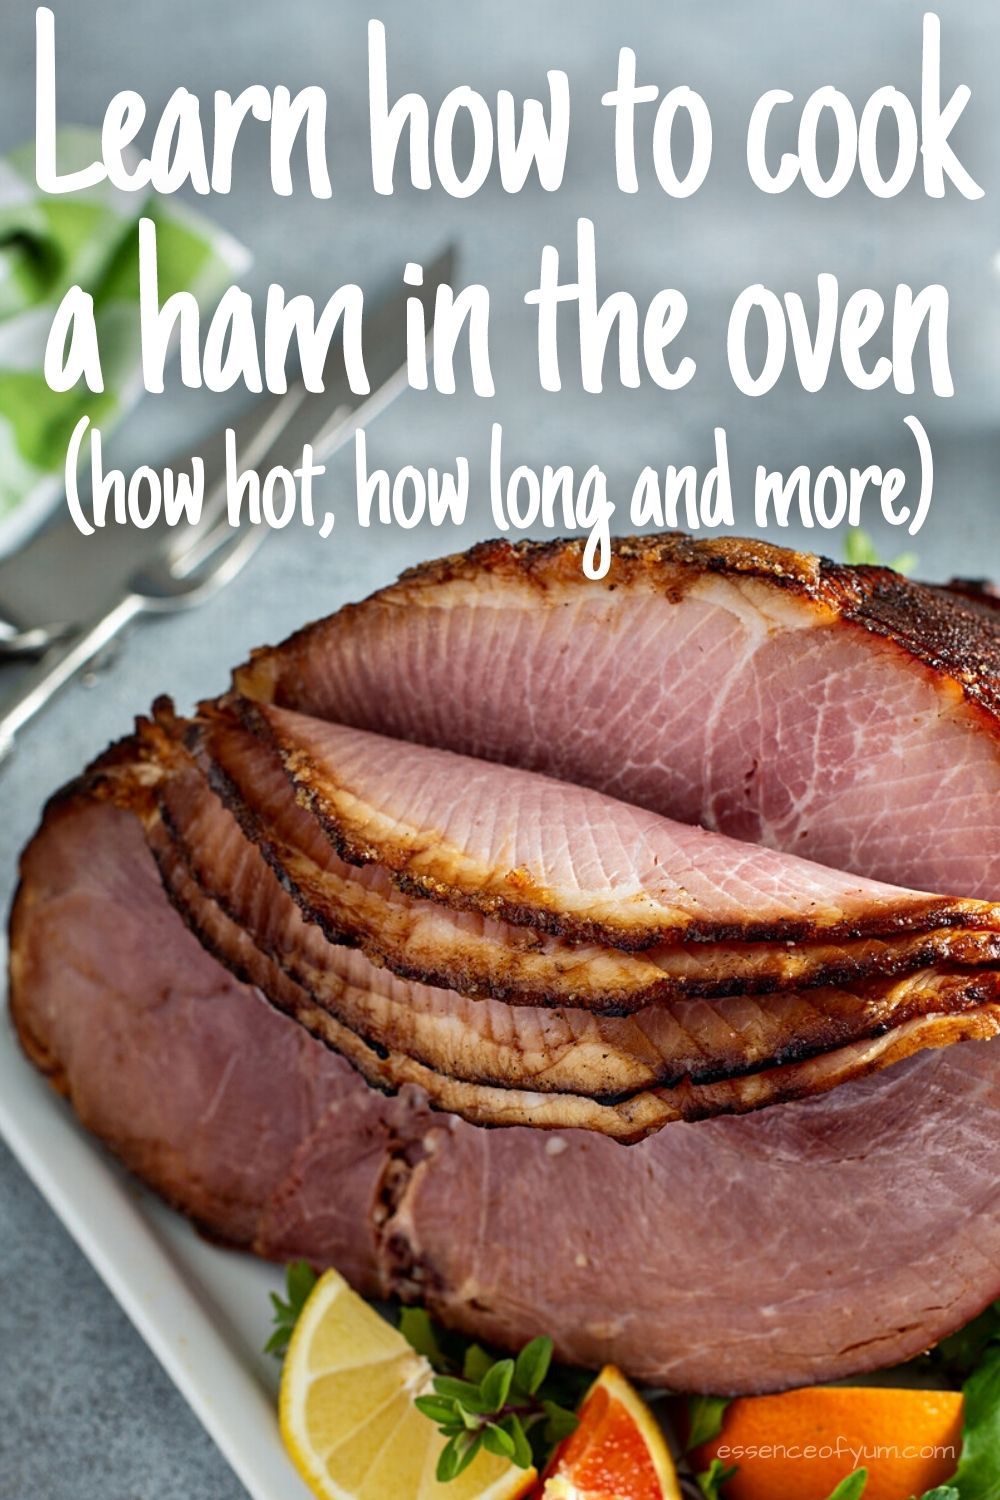 Savor The Flavor: How To Bake A Mouthwatering Ham In Your Own Kitchen